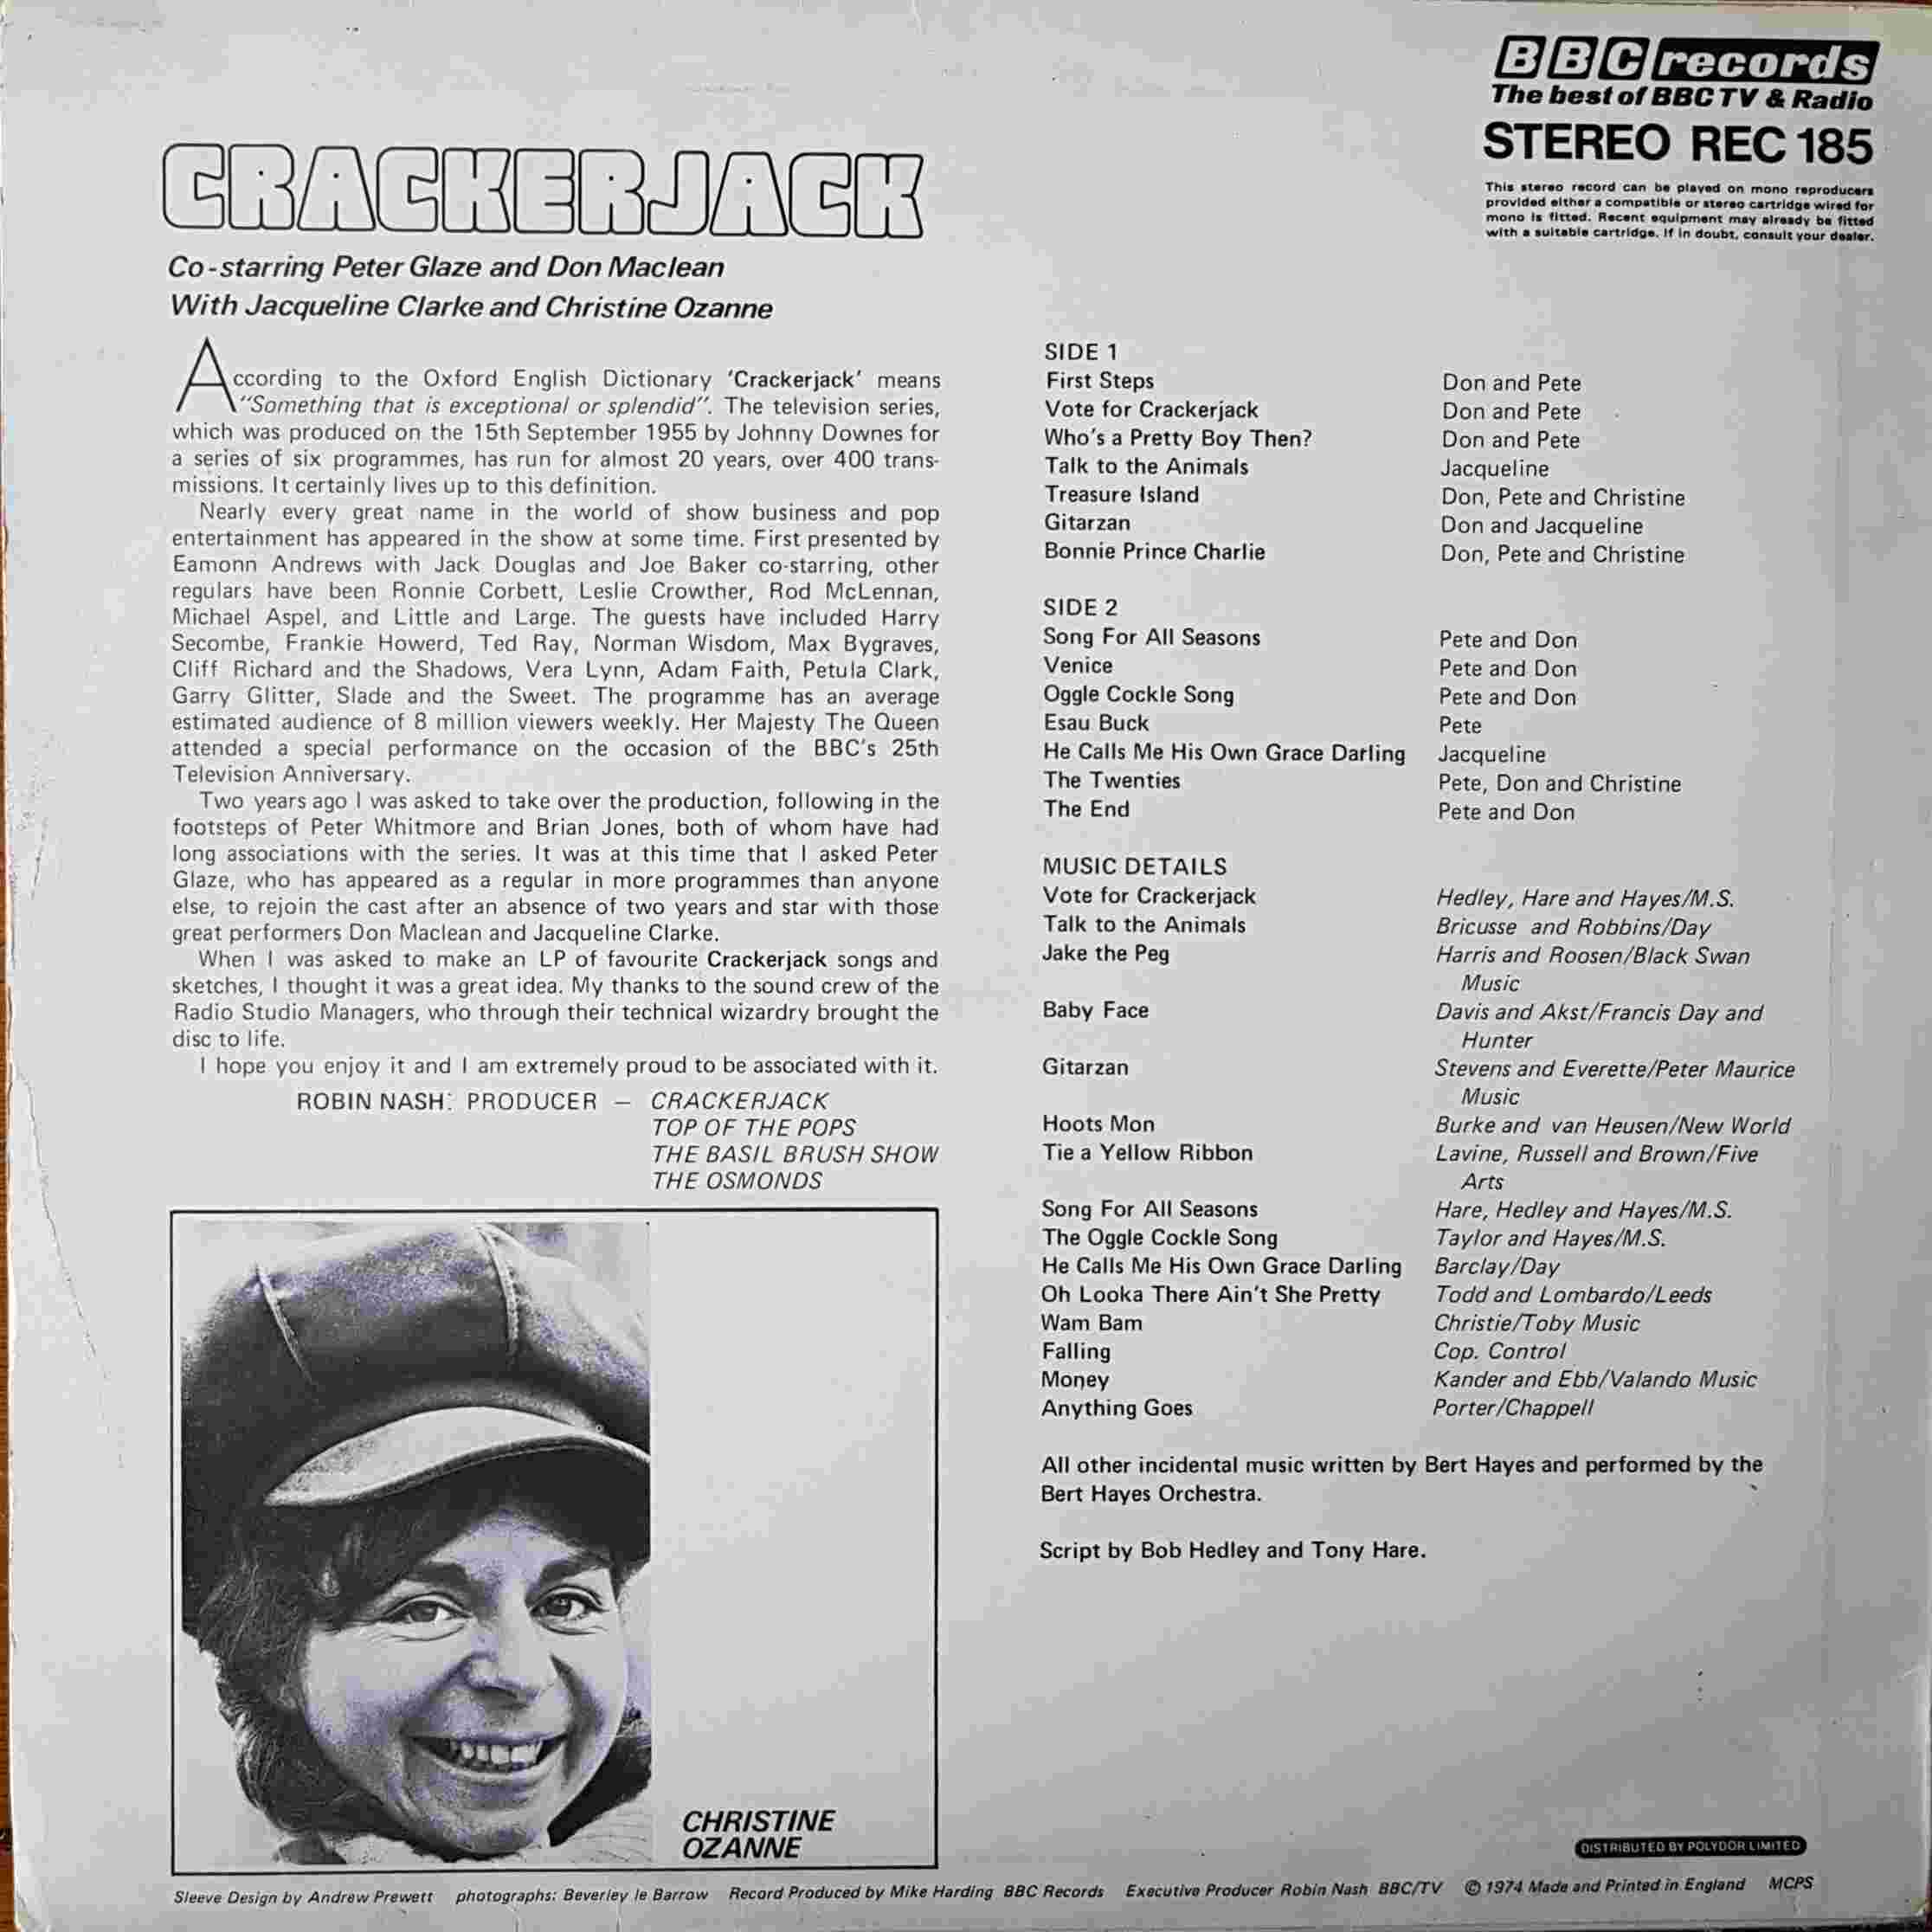 Picture of REC 185 Crackerjack by artist Various from the BBC records and Tapes library